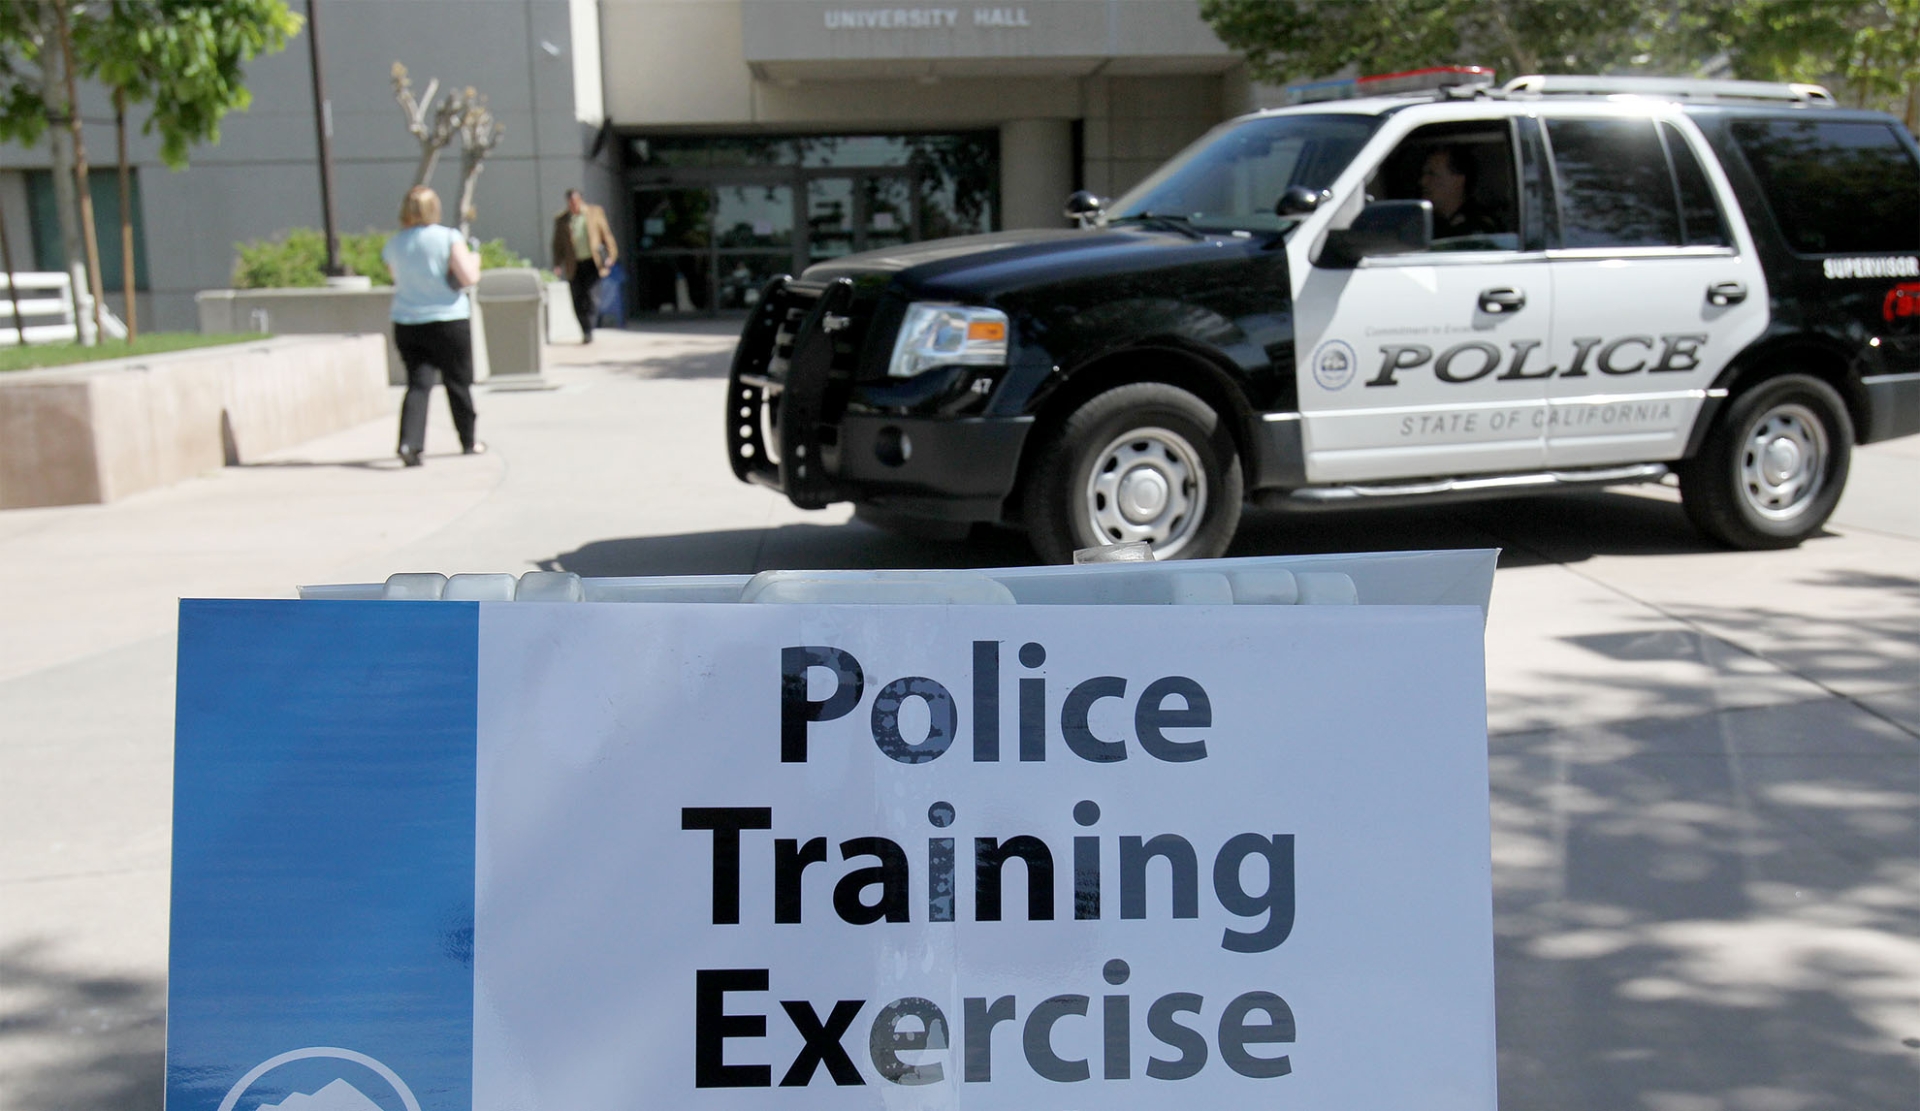 Officers train on campus to be prepared for almost any situation to look out for the safety of students, faculty, staff and university guests.